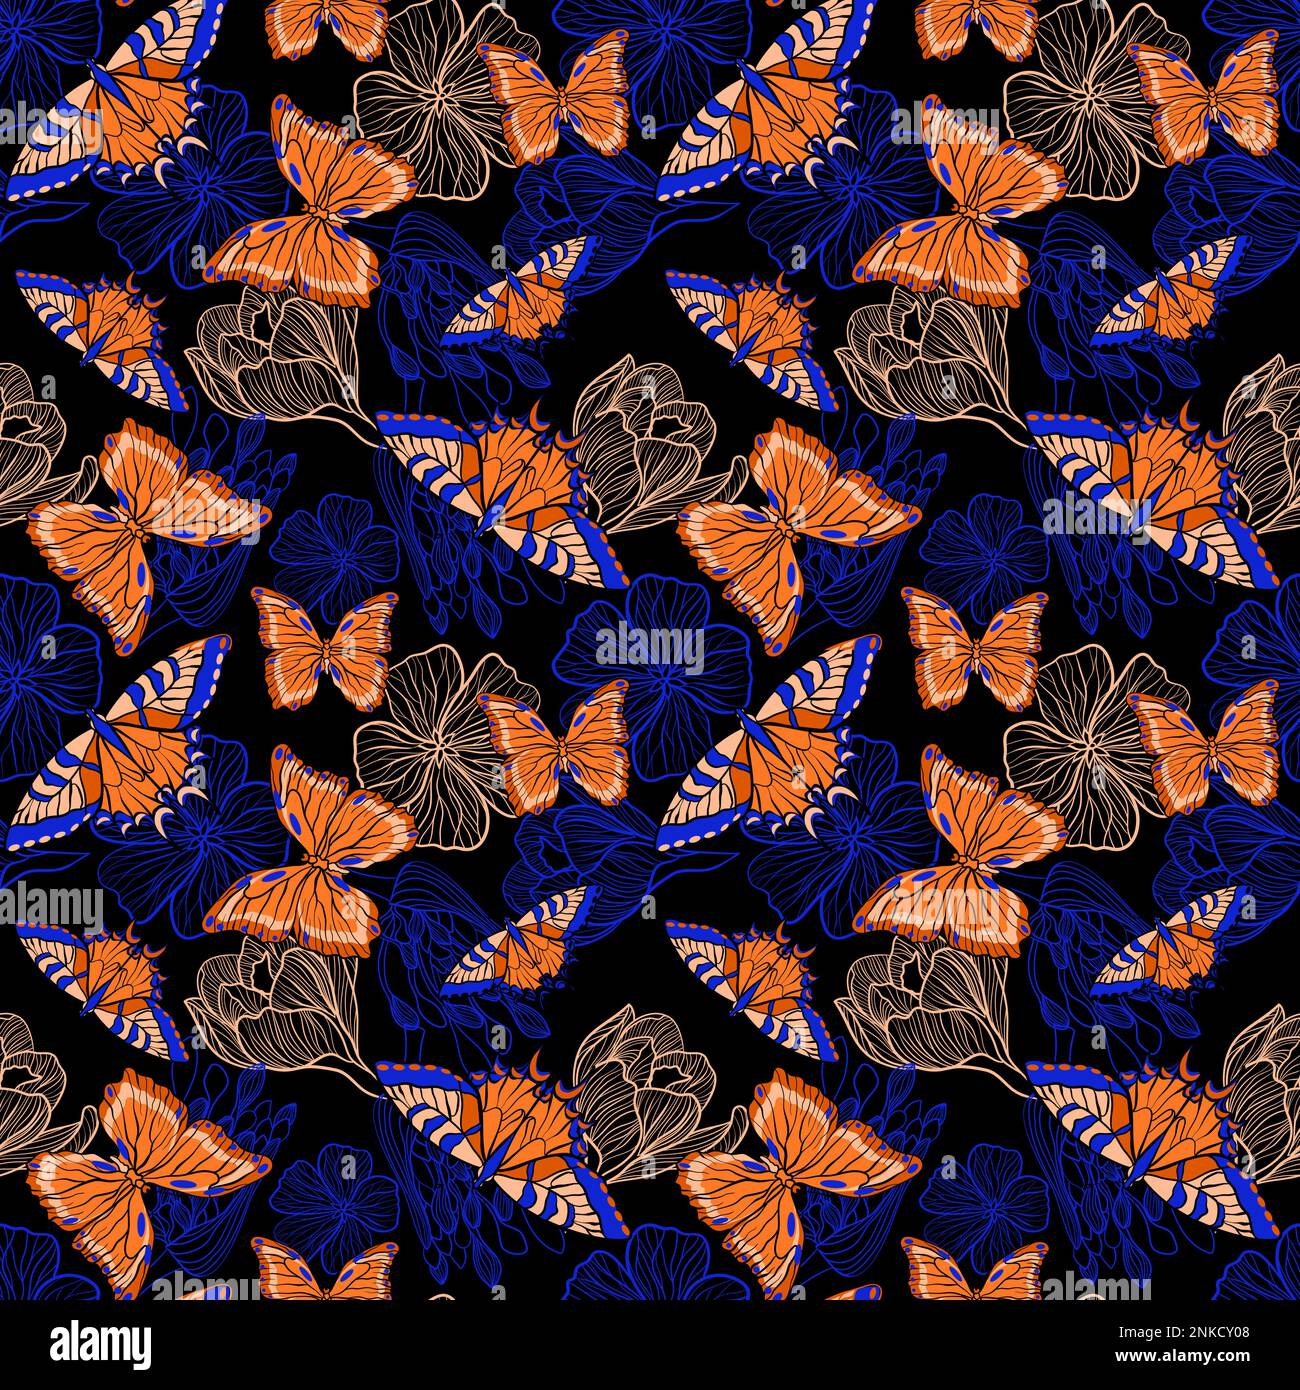 Seamless floral pattern with orange butterflies and blue flowers in doodle technique vector illustration Stock Vector